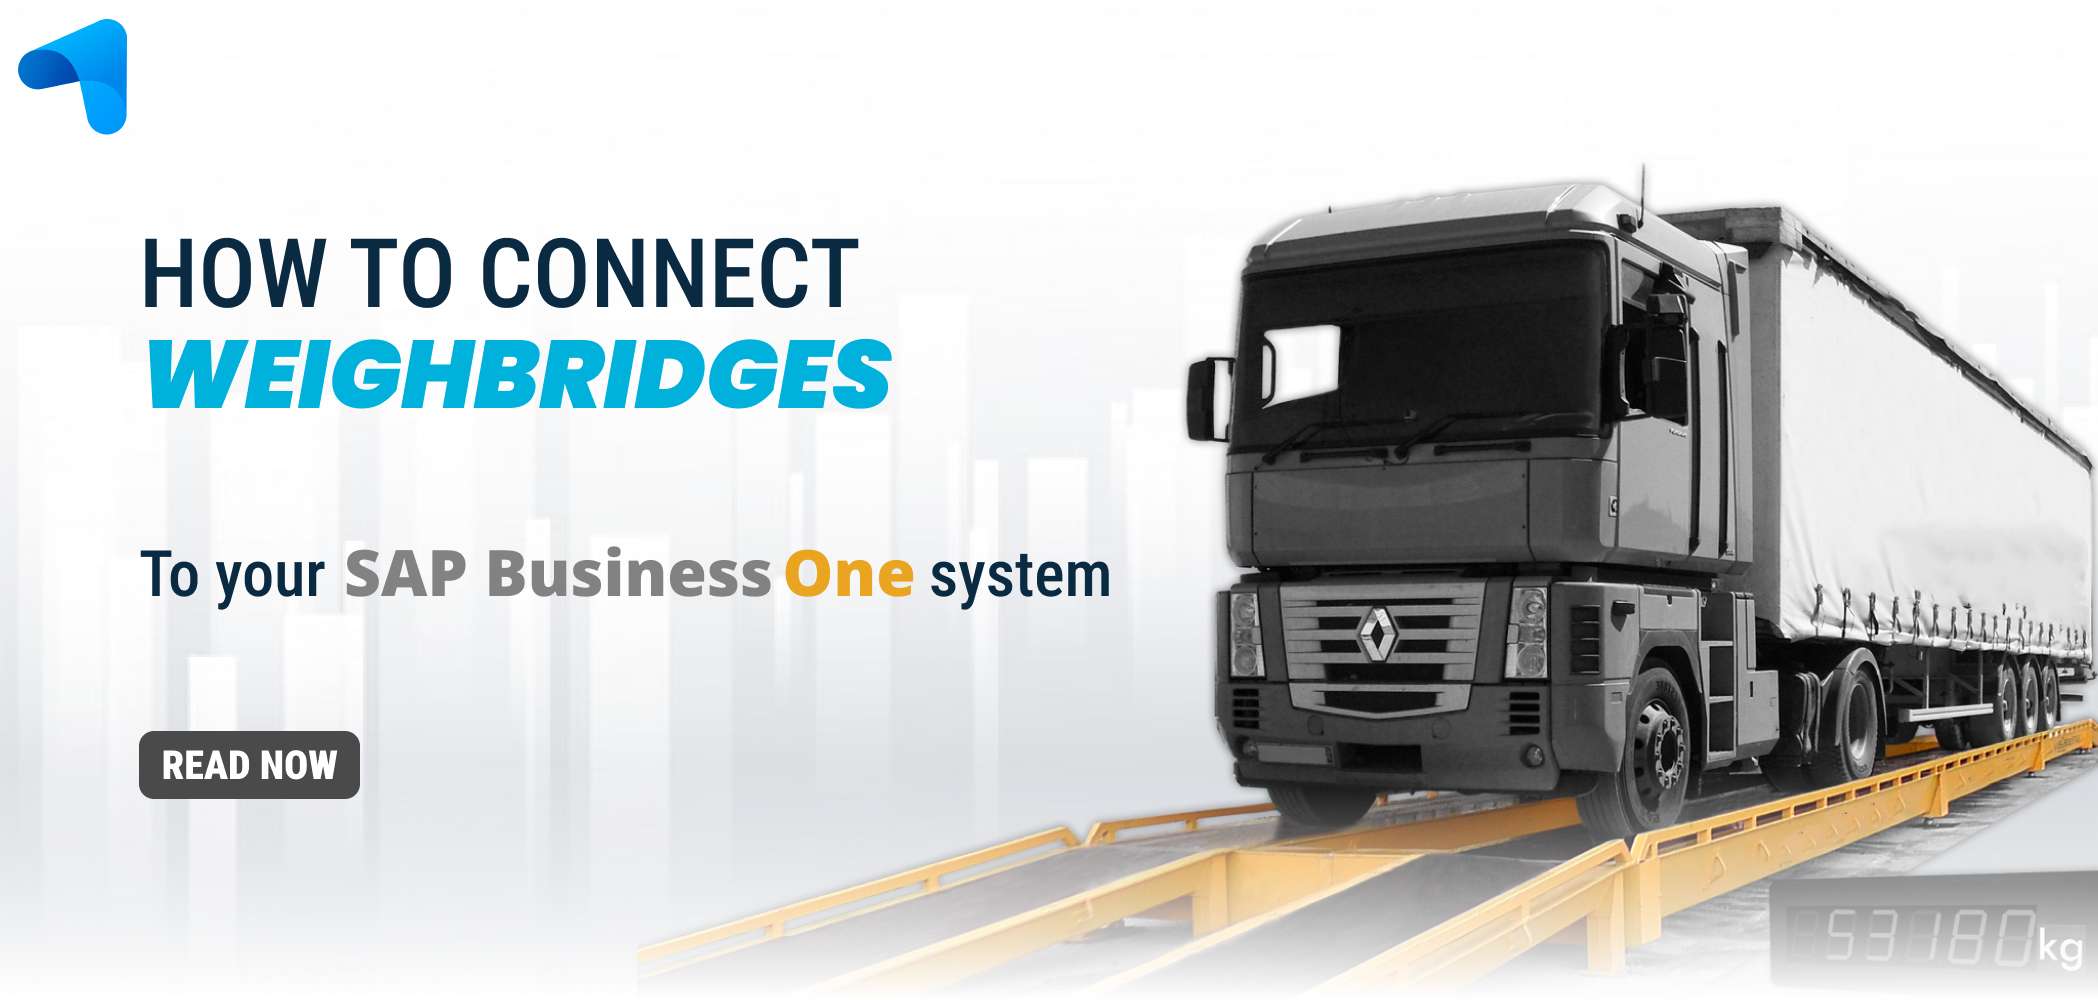 Step-by-step guide on seamlessly integrating weighbridges with your SAP Business One System.